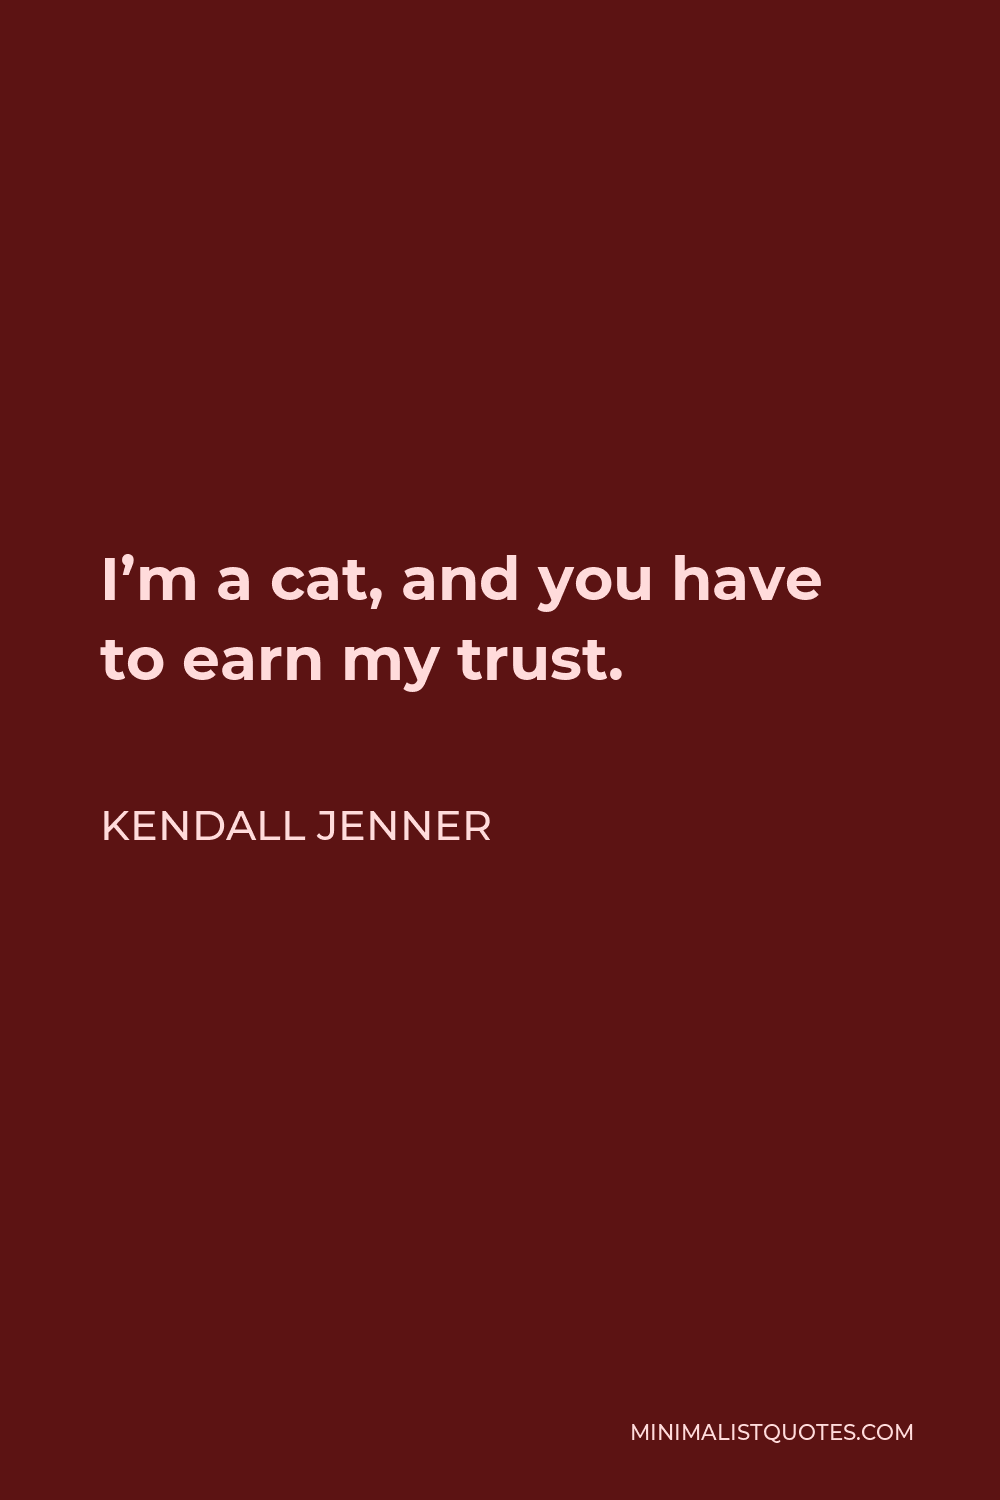 Kendall Jenner Quote - I’m a cat, and you have to earn my trust.